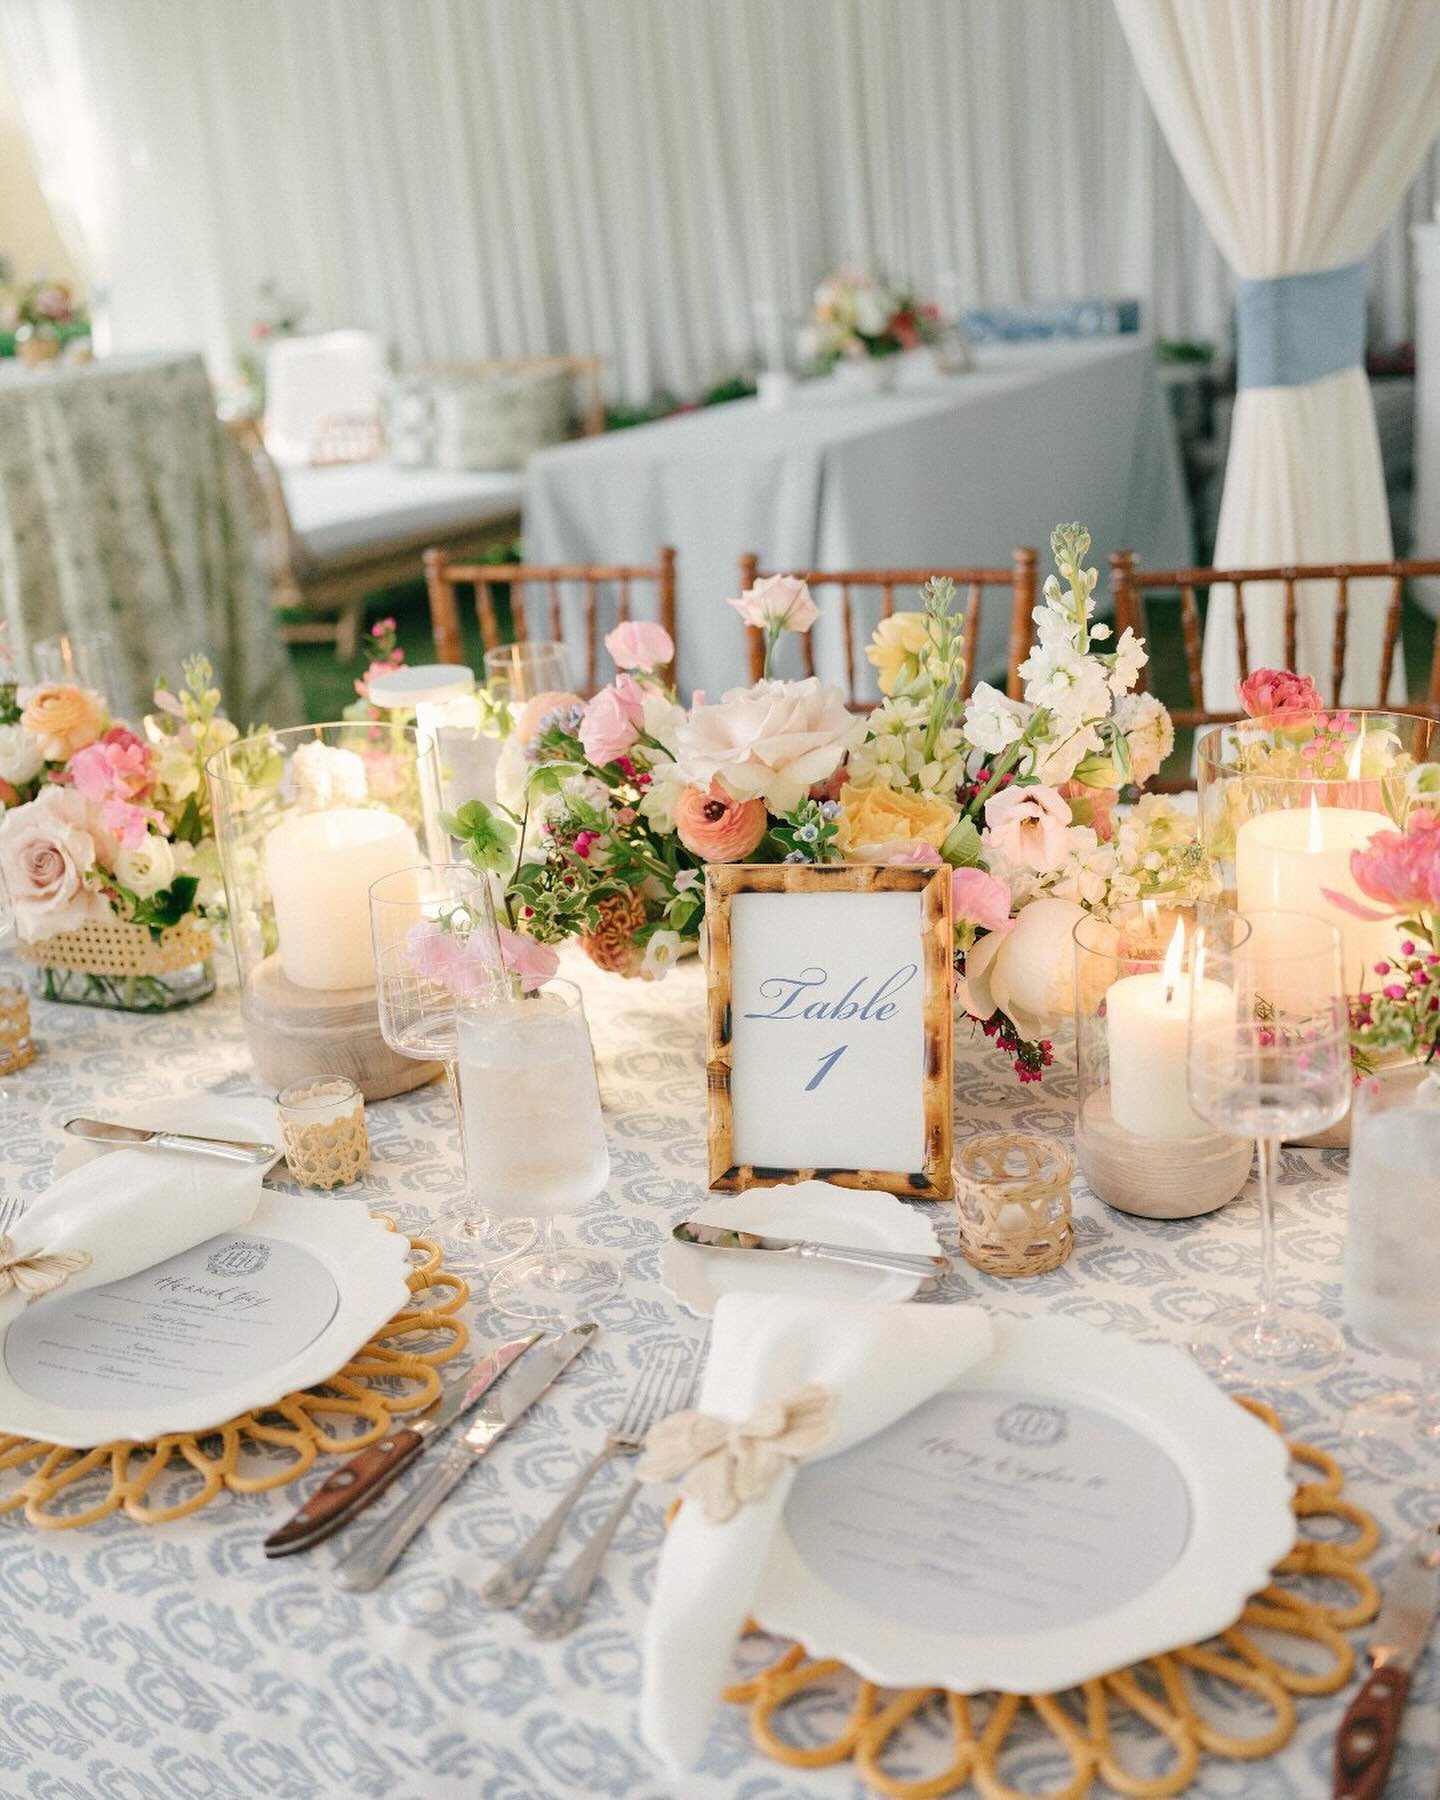 When the setting looks like this, you know you&rsquo;re in for a delicious evening! 🍽️ ✨ 🌸 
⁣⁣⁣
📸: @annerhettphotography